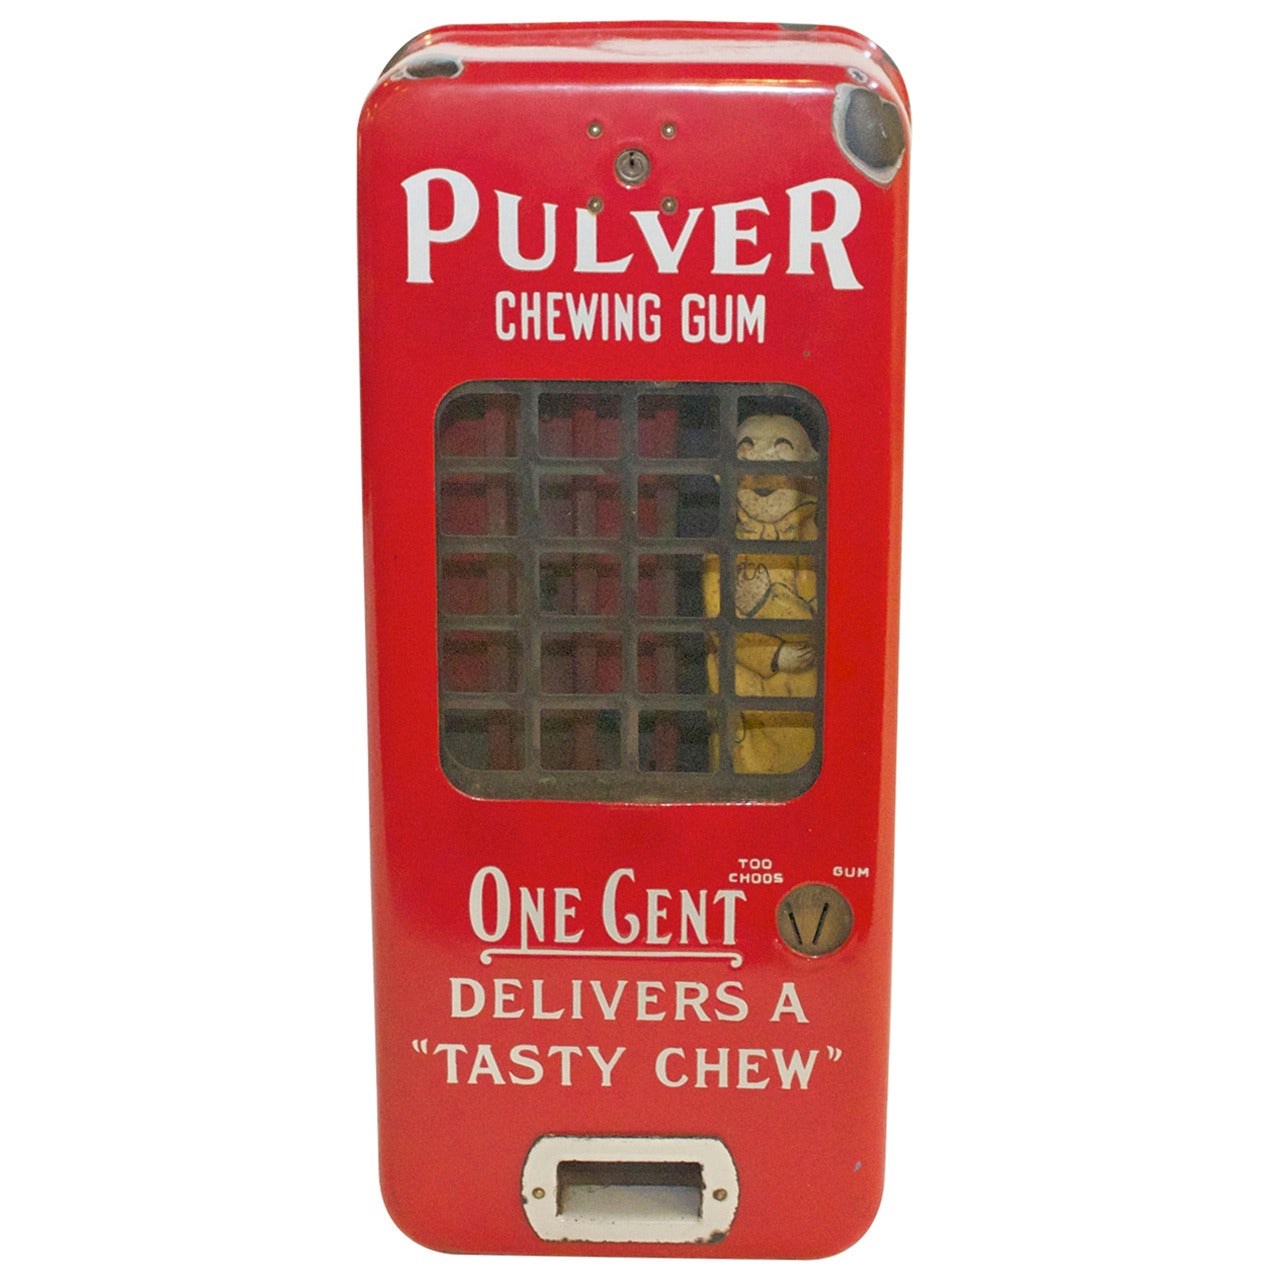 Pulver Wind Up One Cent Chewing Gum Dispenser Vending Machine For Sale